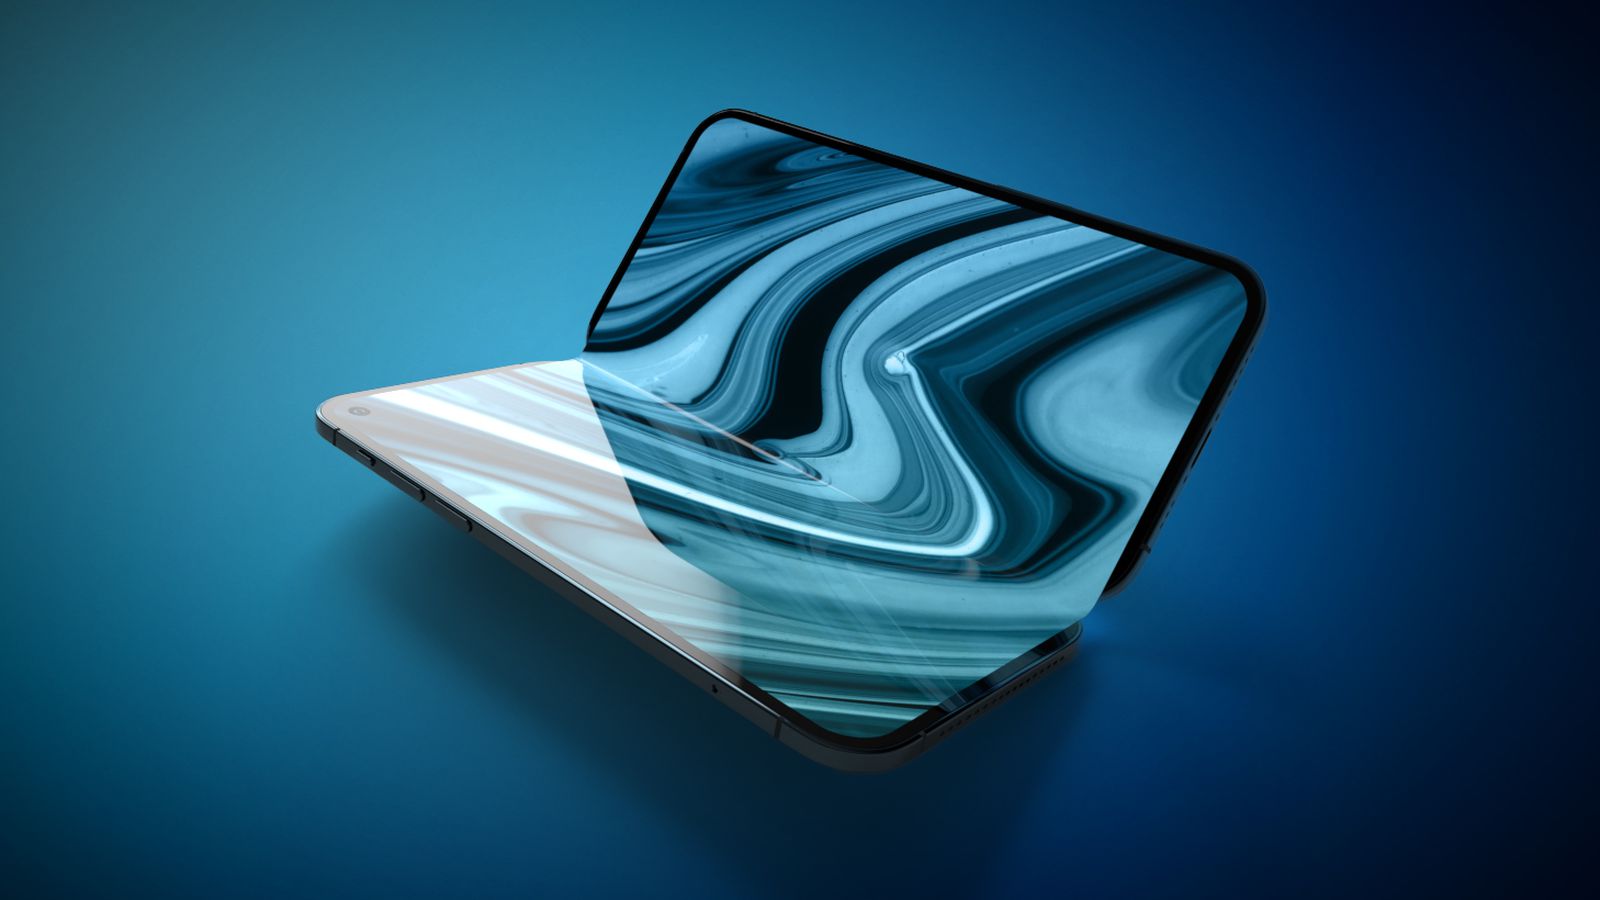 Kuo: Apple to Release Foldable iPad With Carbon Fiber Kickstand in 2024 – MacRumors